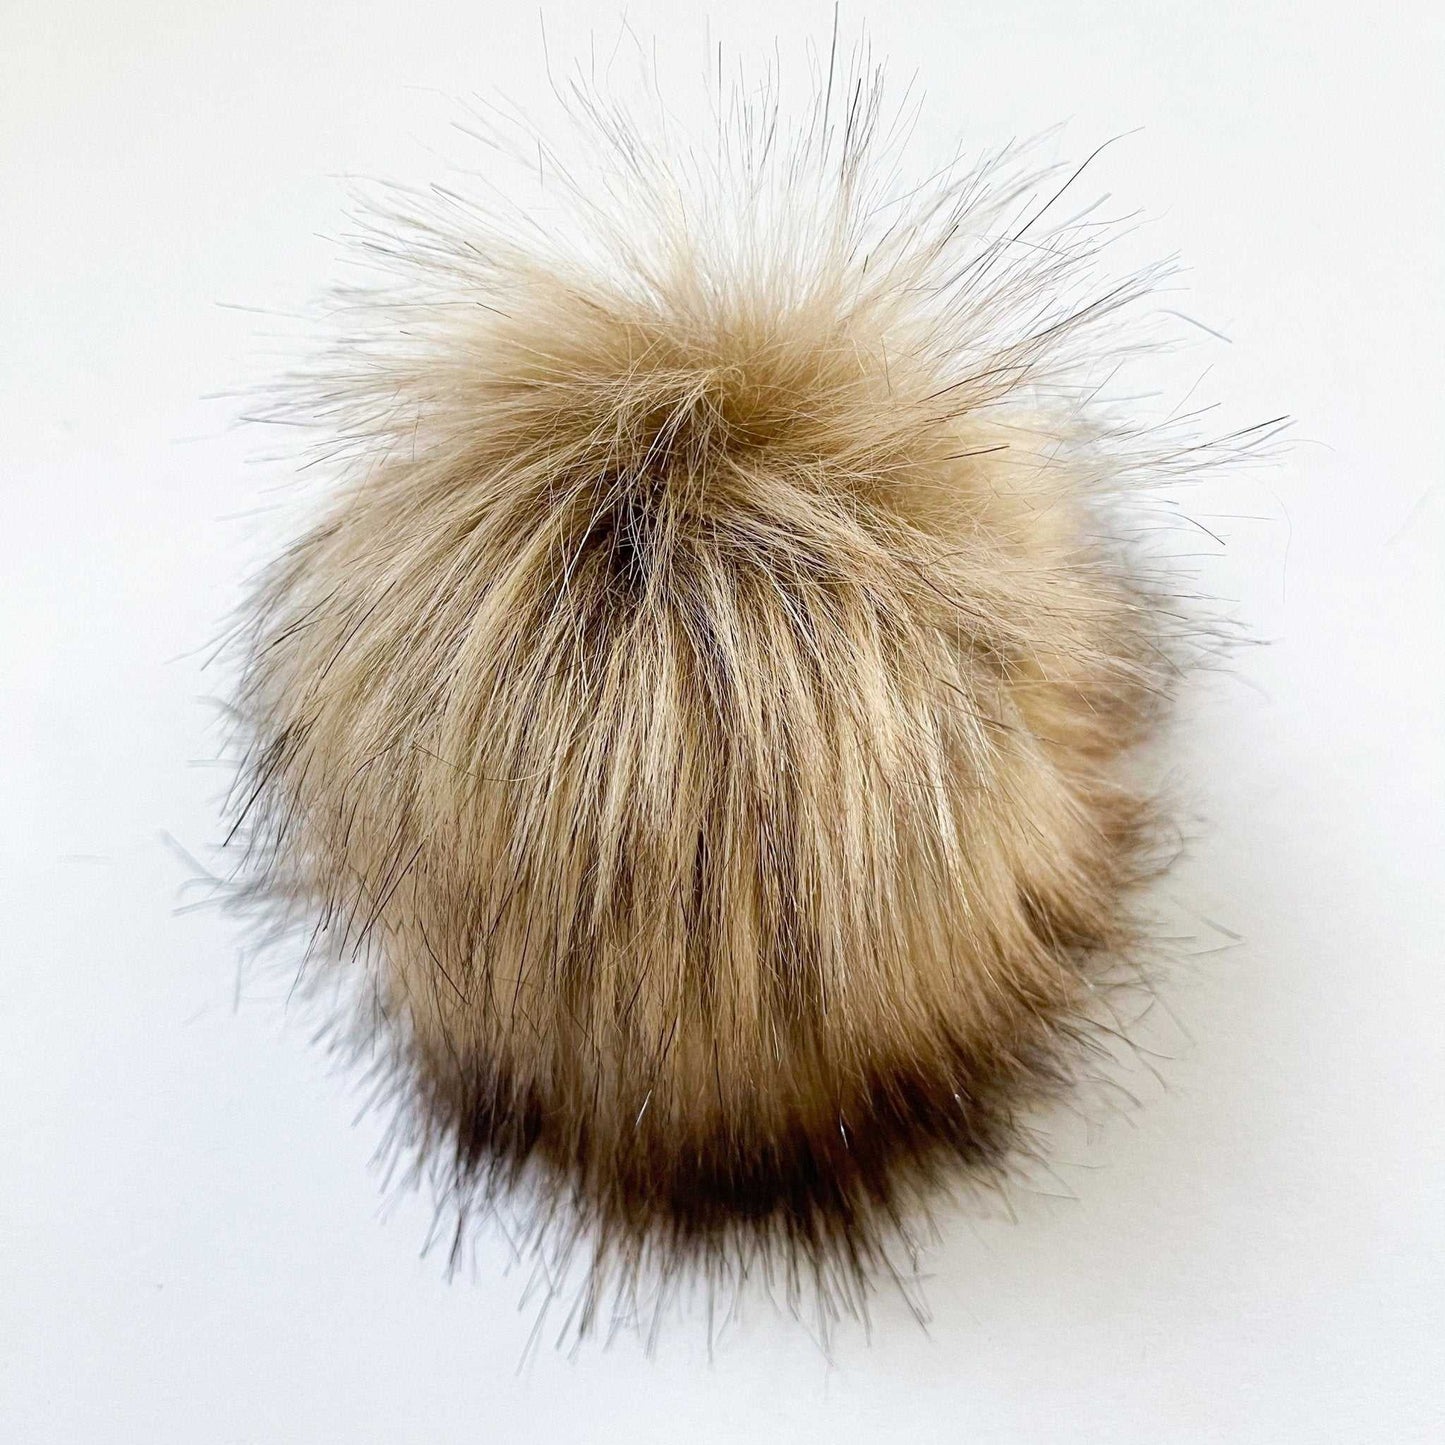 Lynx Faux Fur Fabric by the Yard or Meter | Brown, Natural, Tan Pompom, Arts & Crafts, Decor, Costume Faux Fur Fabric 4 $ Buttons & Beans Co.